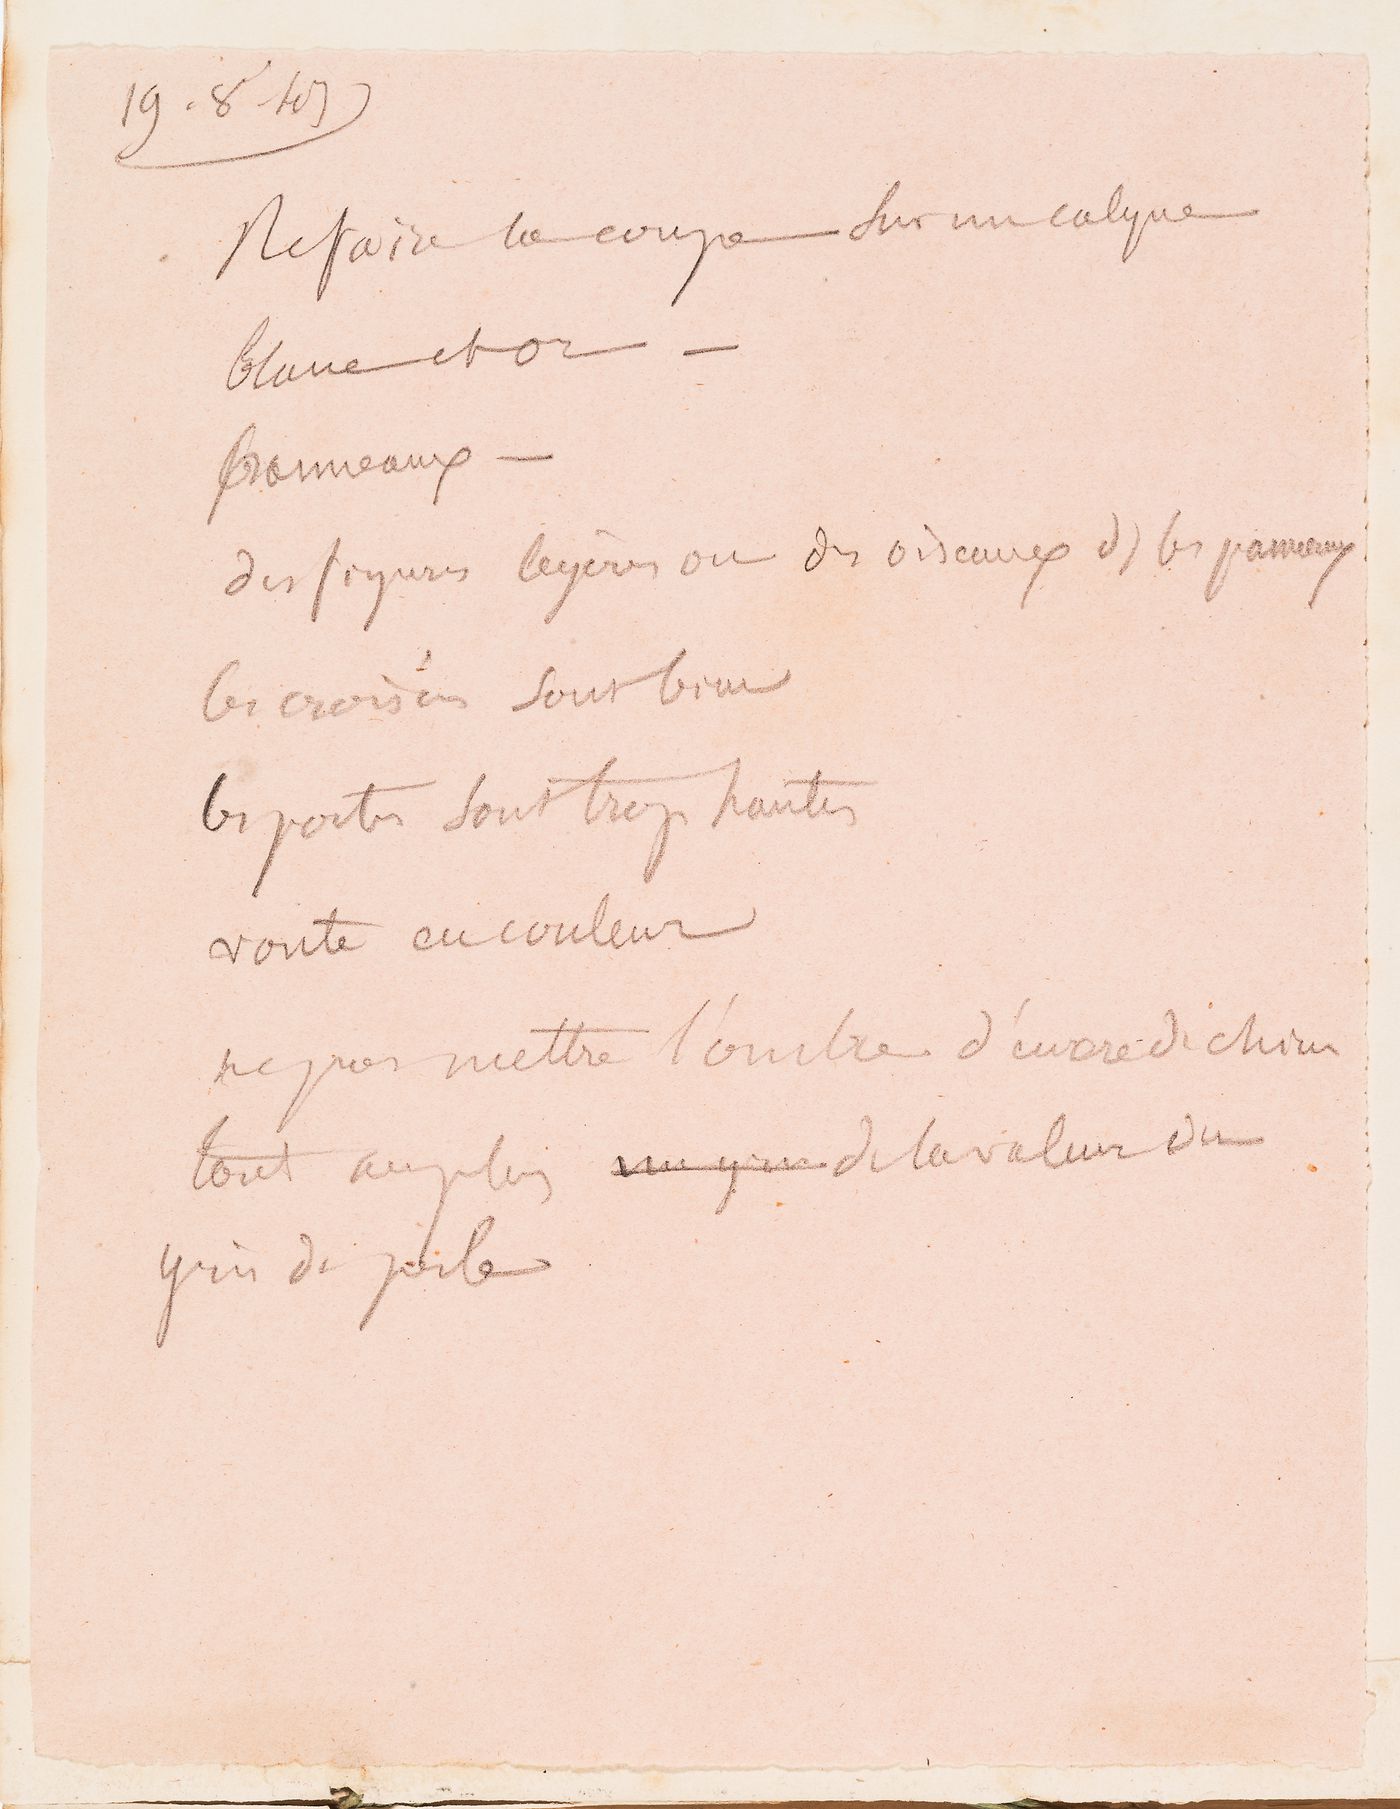 List indicating the colour scheme for the "foyer" for an opera house for the Académie royale de musique